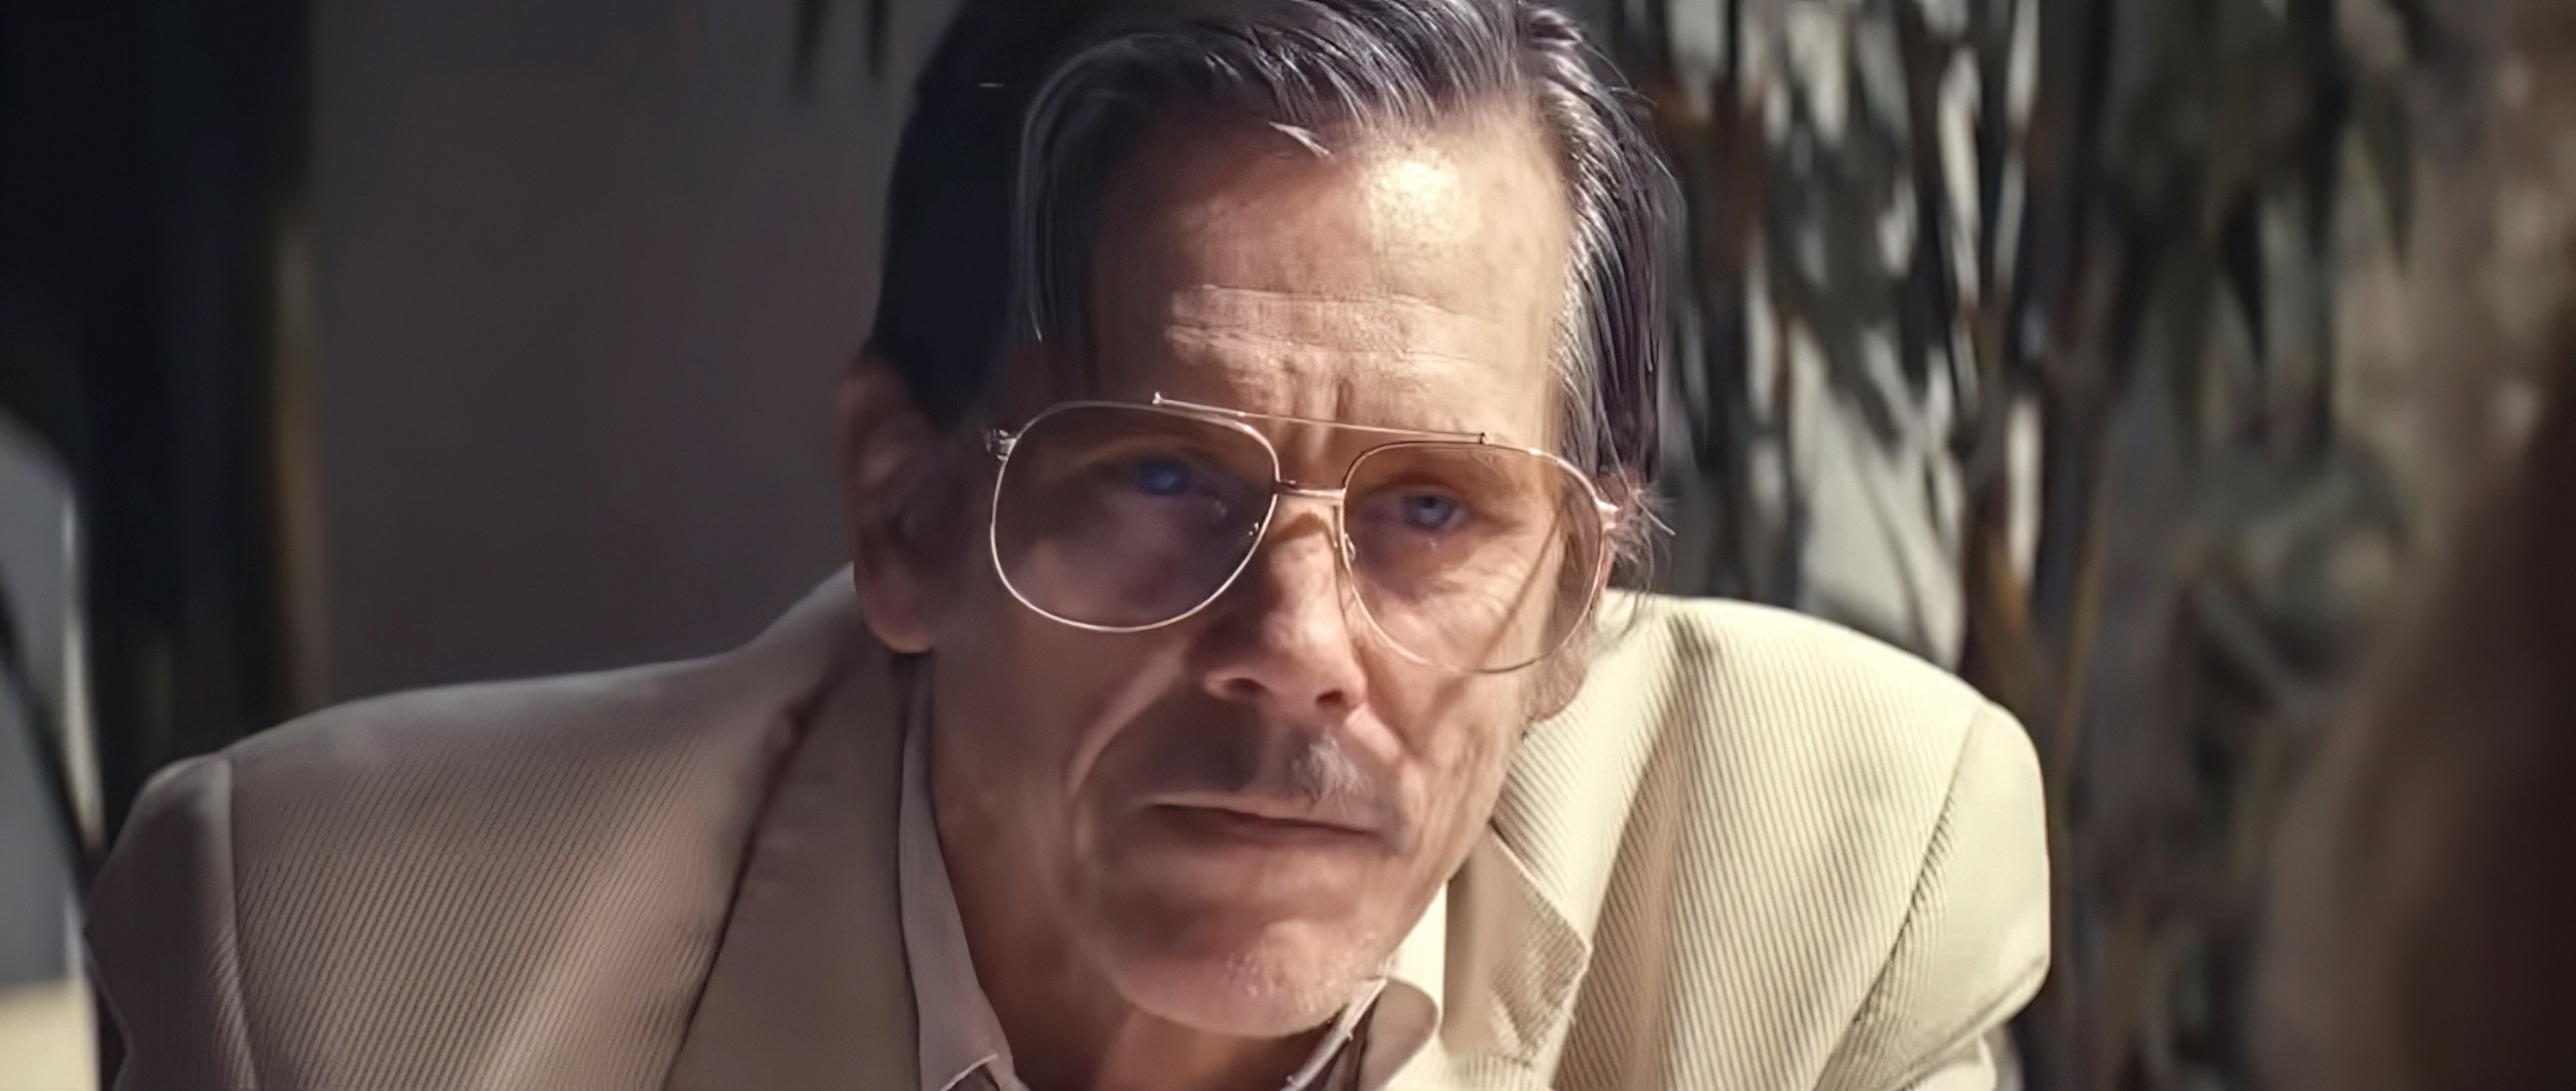 Kevin Bacon wears glasses and a light-colored blazer, looking intently at someone off-camera